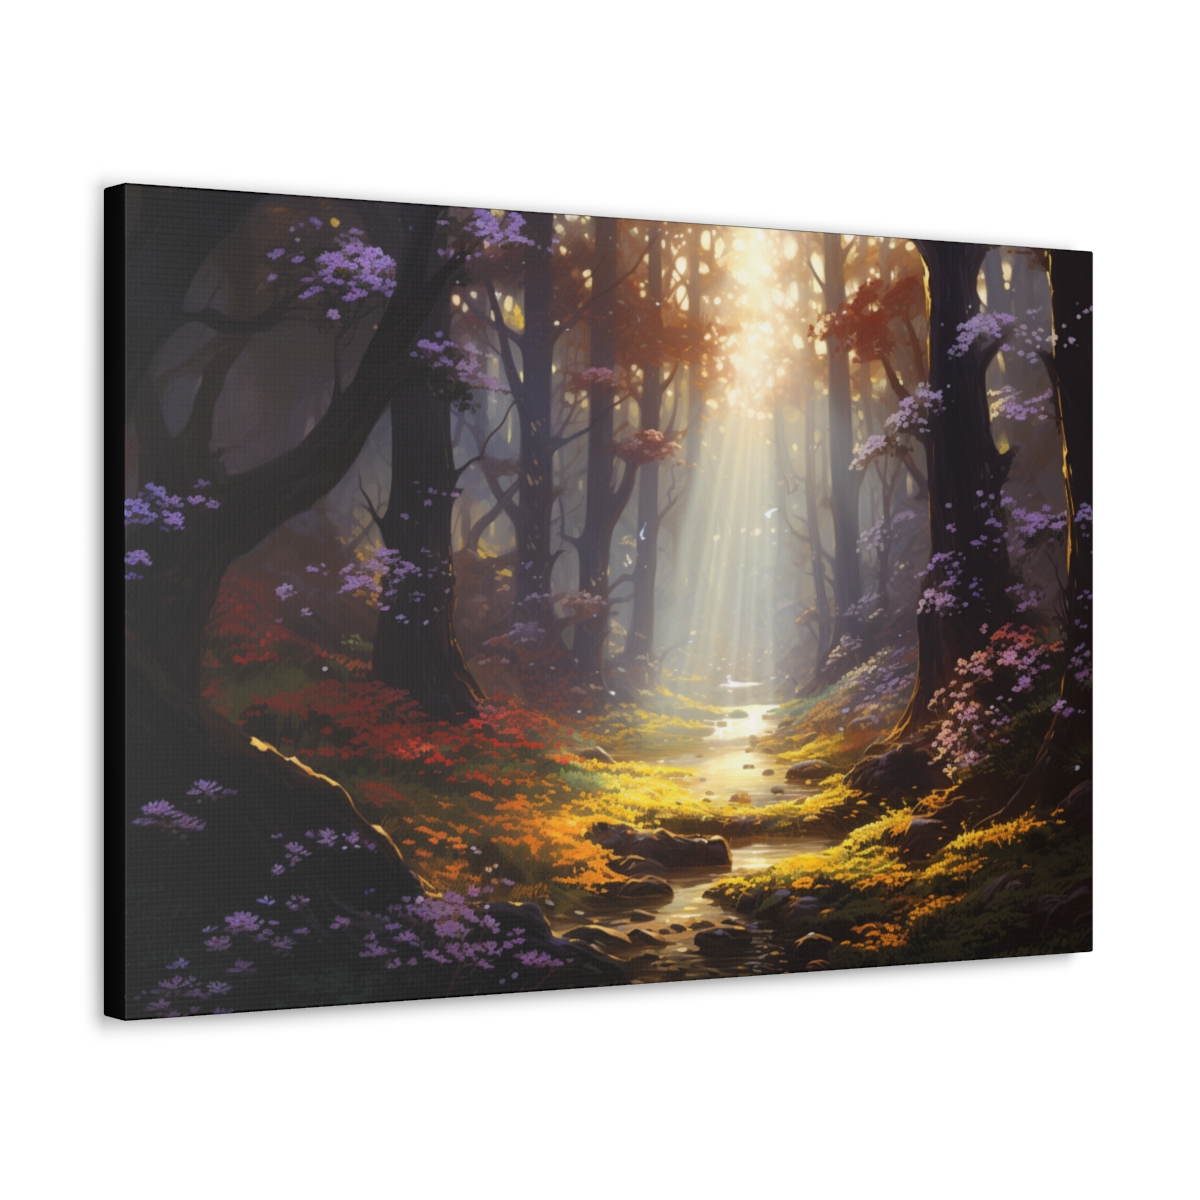 Forest Wall Art Canvas Print: Guidance From The Sun